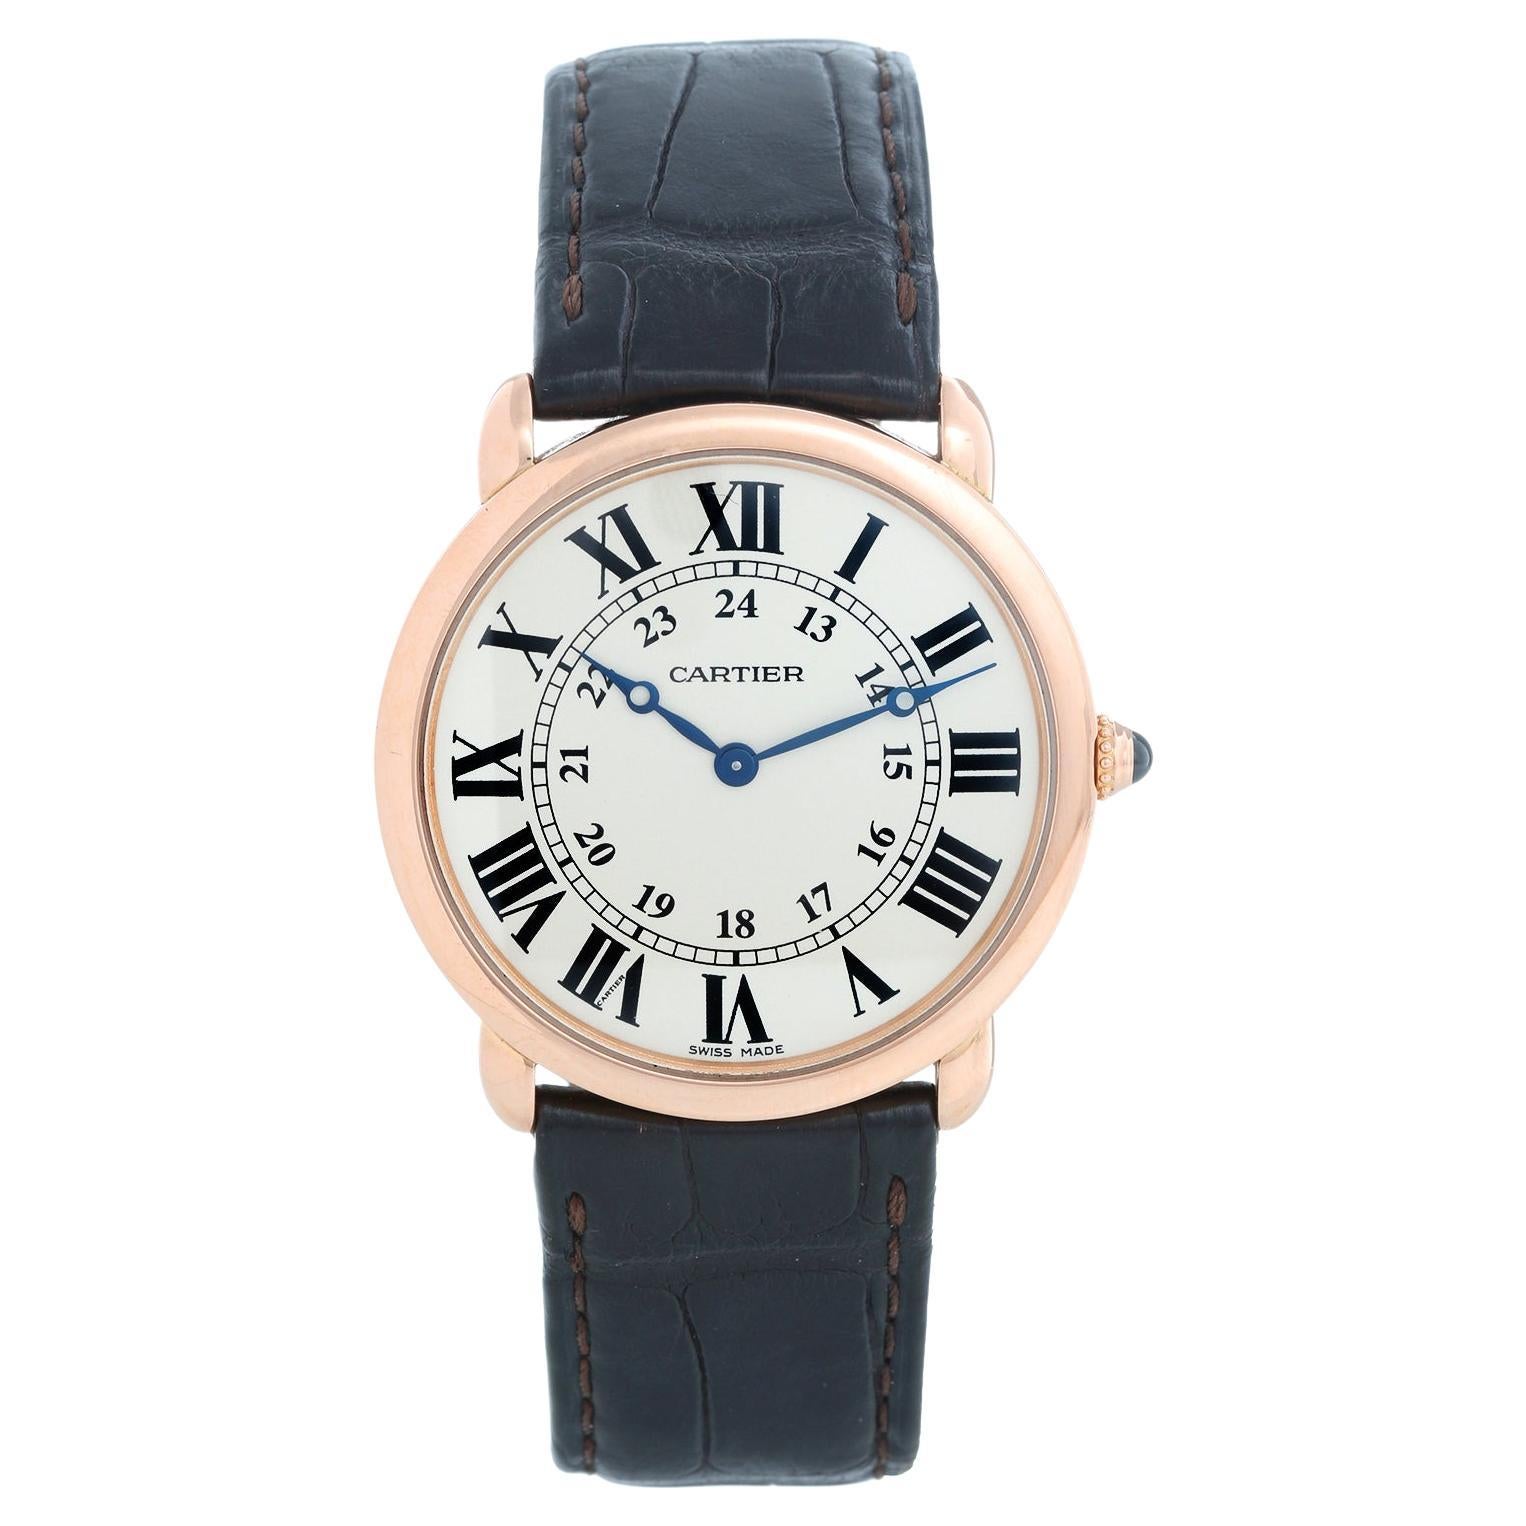 Cartier 18k Rose Gold Ronde Louis Ladies Watch 2889 W6800251 For Sale